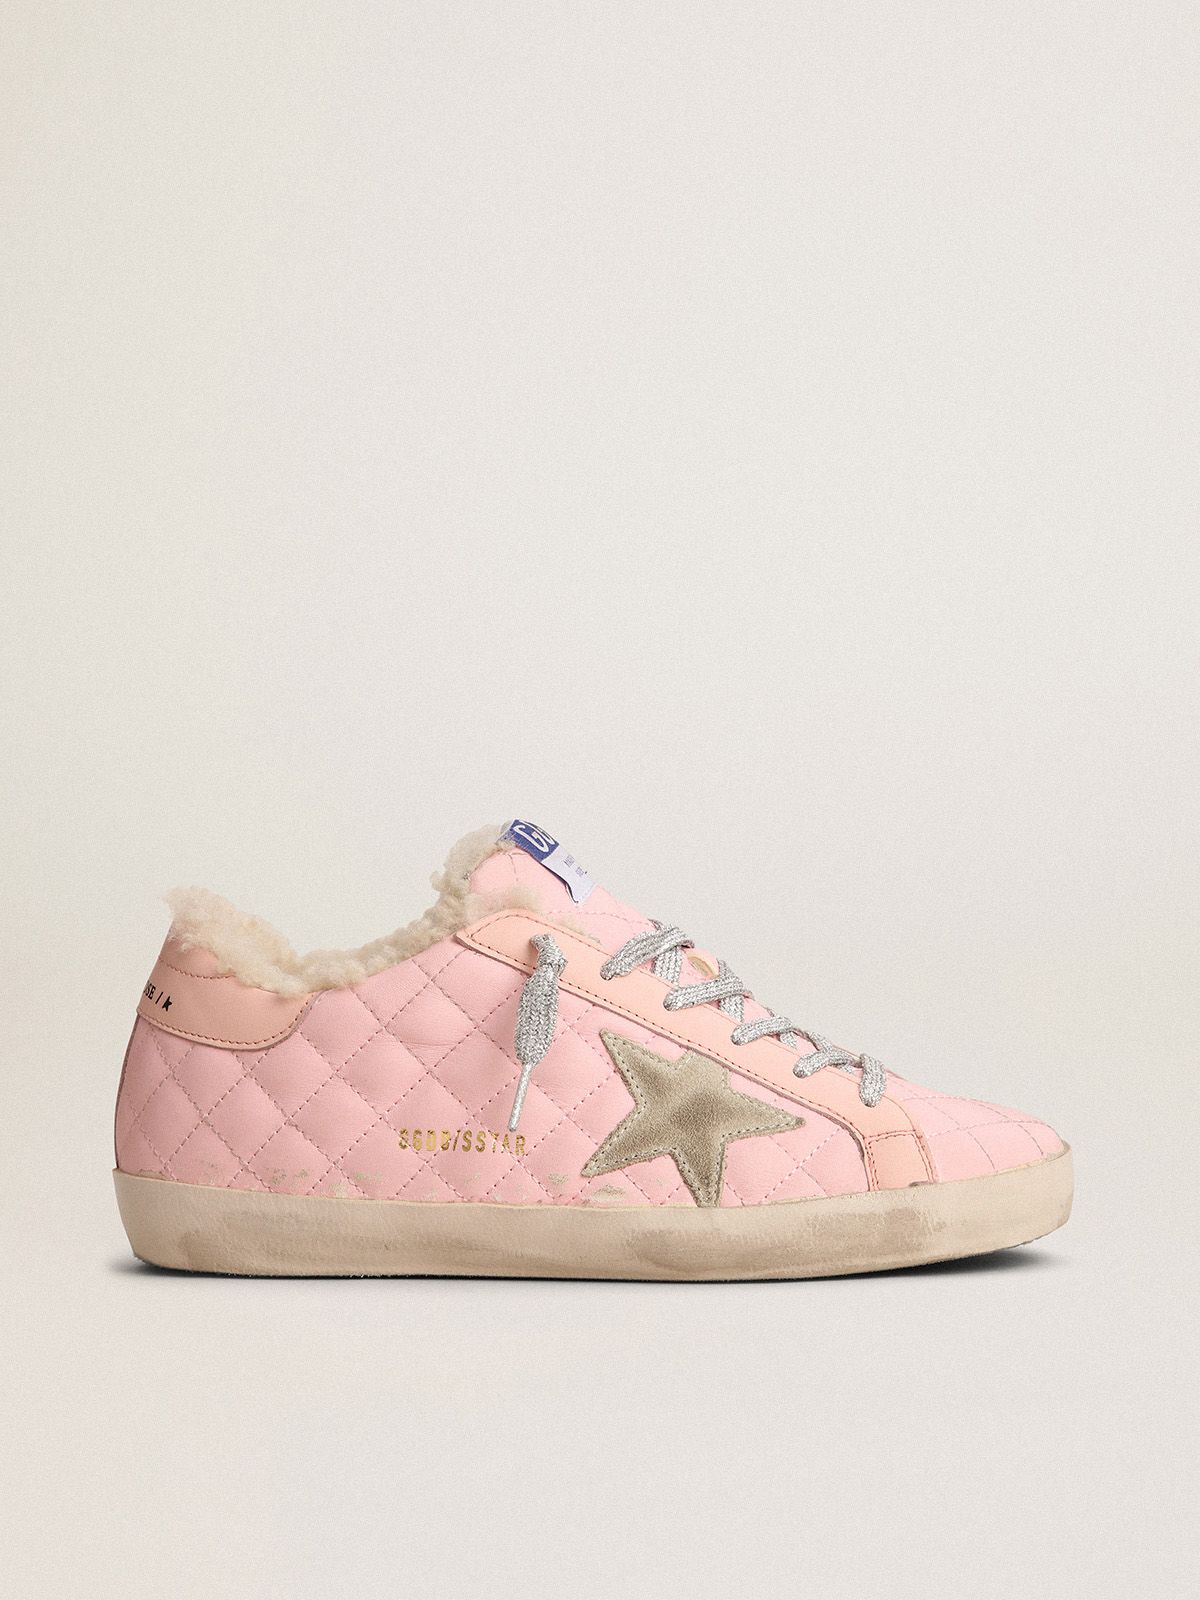 golden goose shearling in lining pink with Super-Star leather quilted sneakers